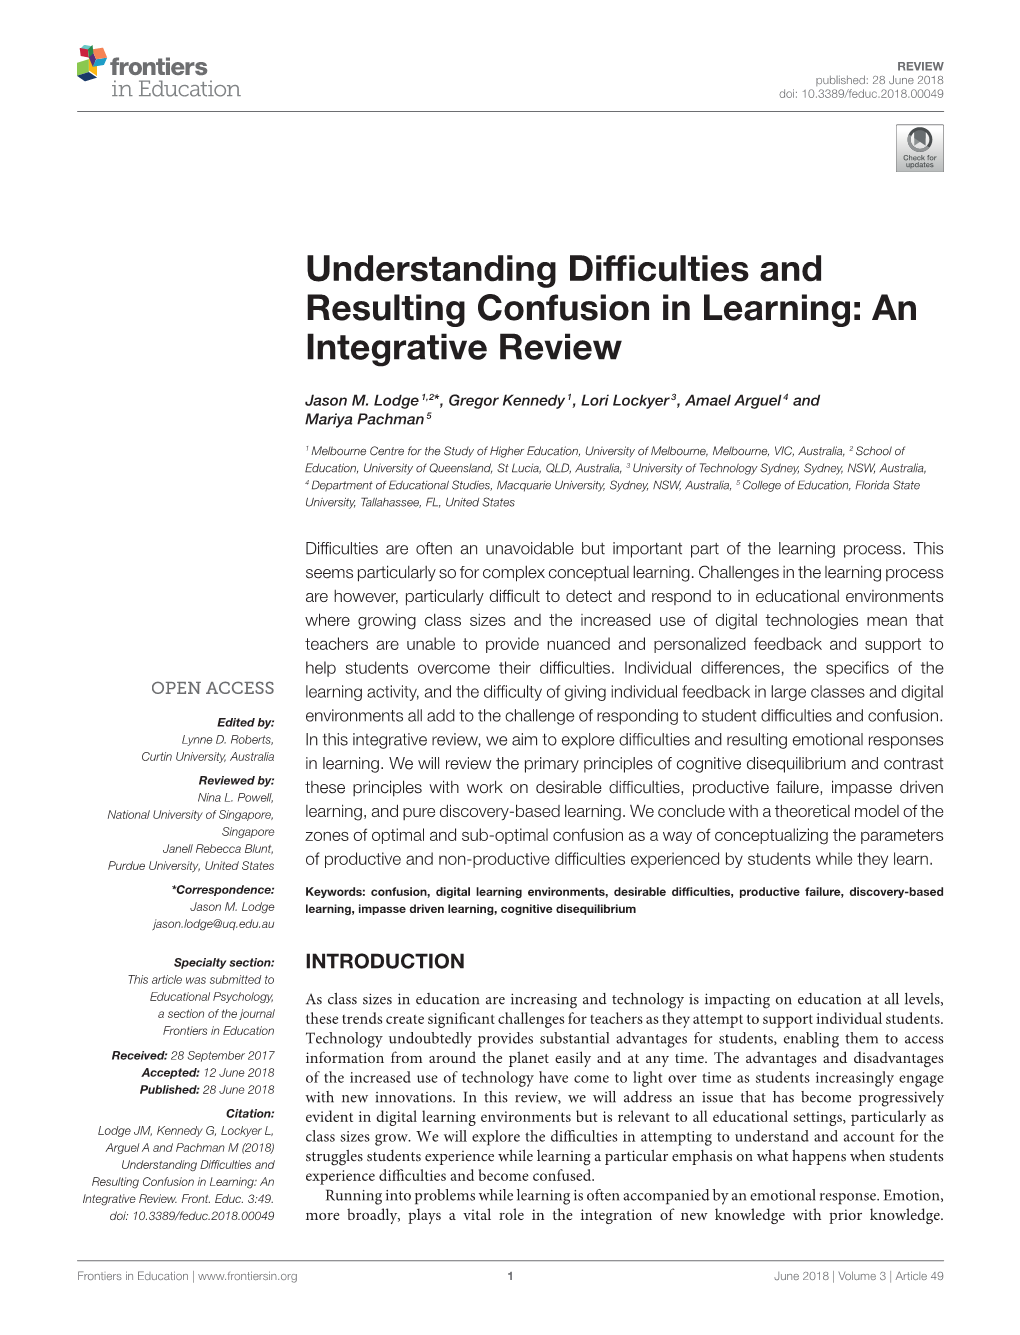 Understanding Difficulties and Resulting Confusion in Learning